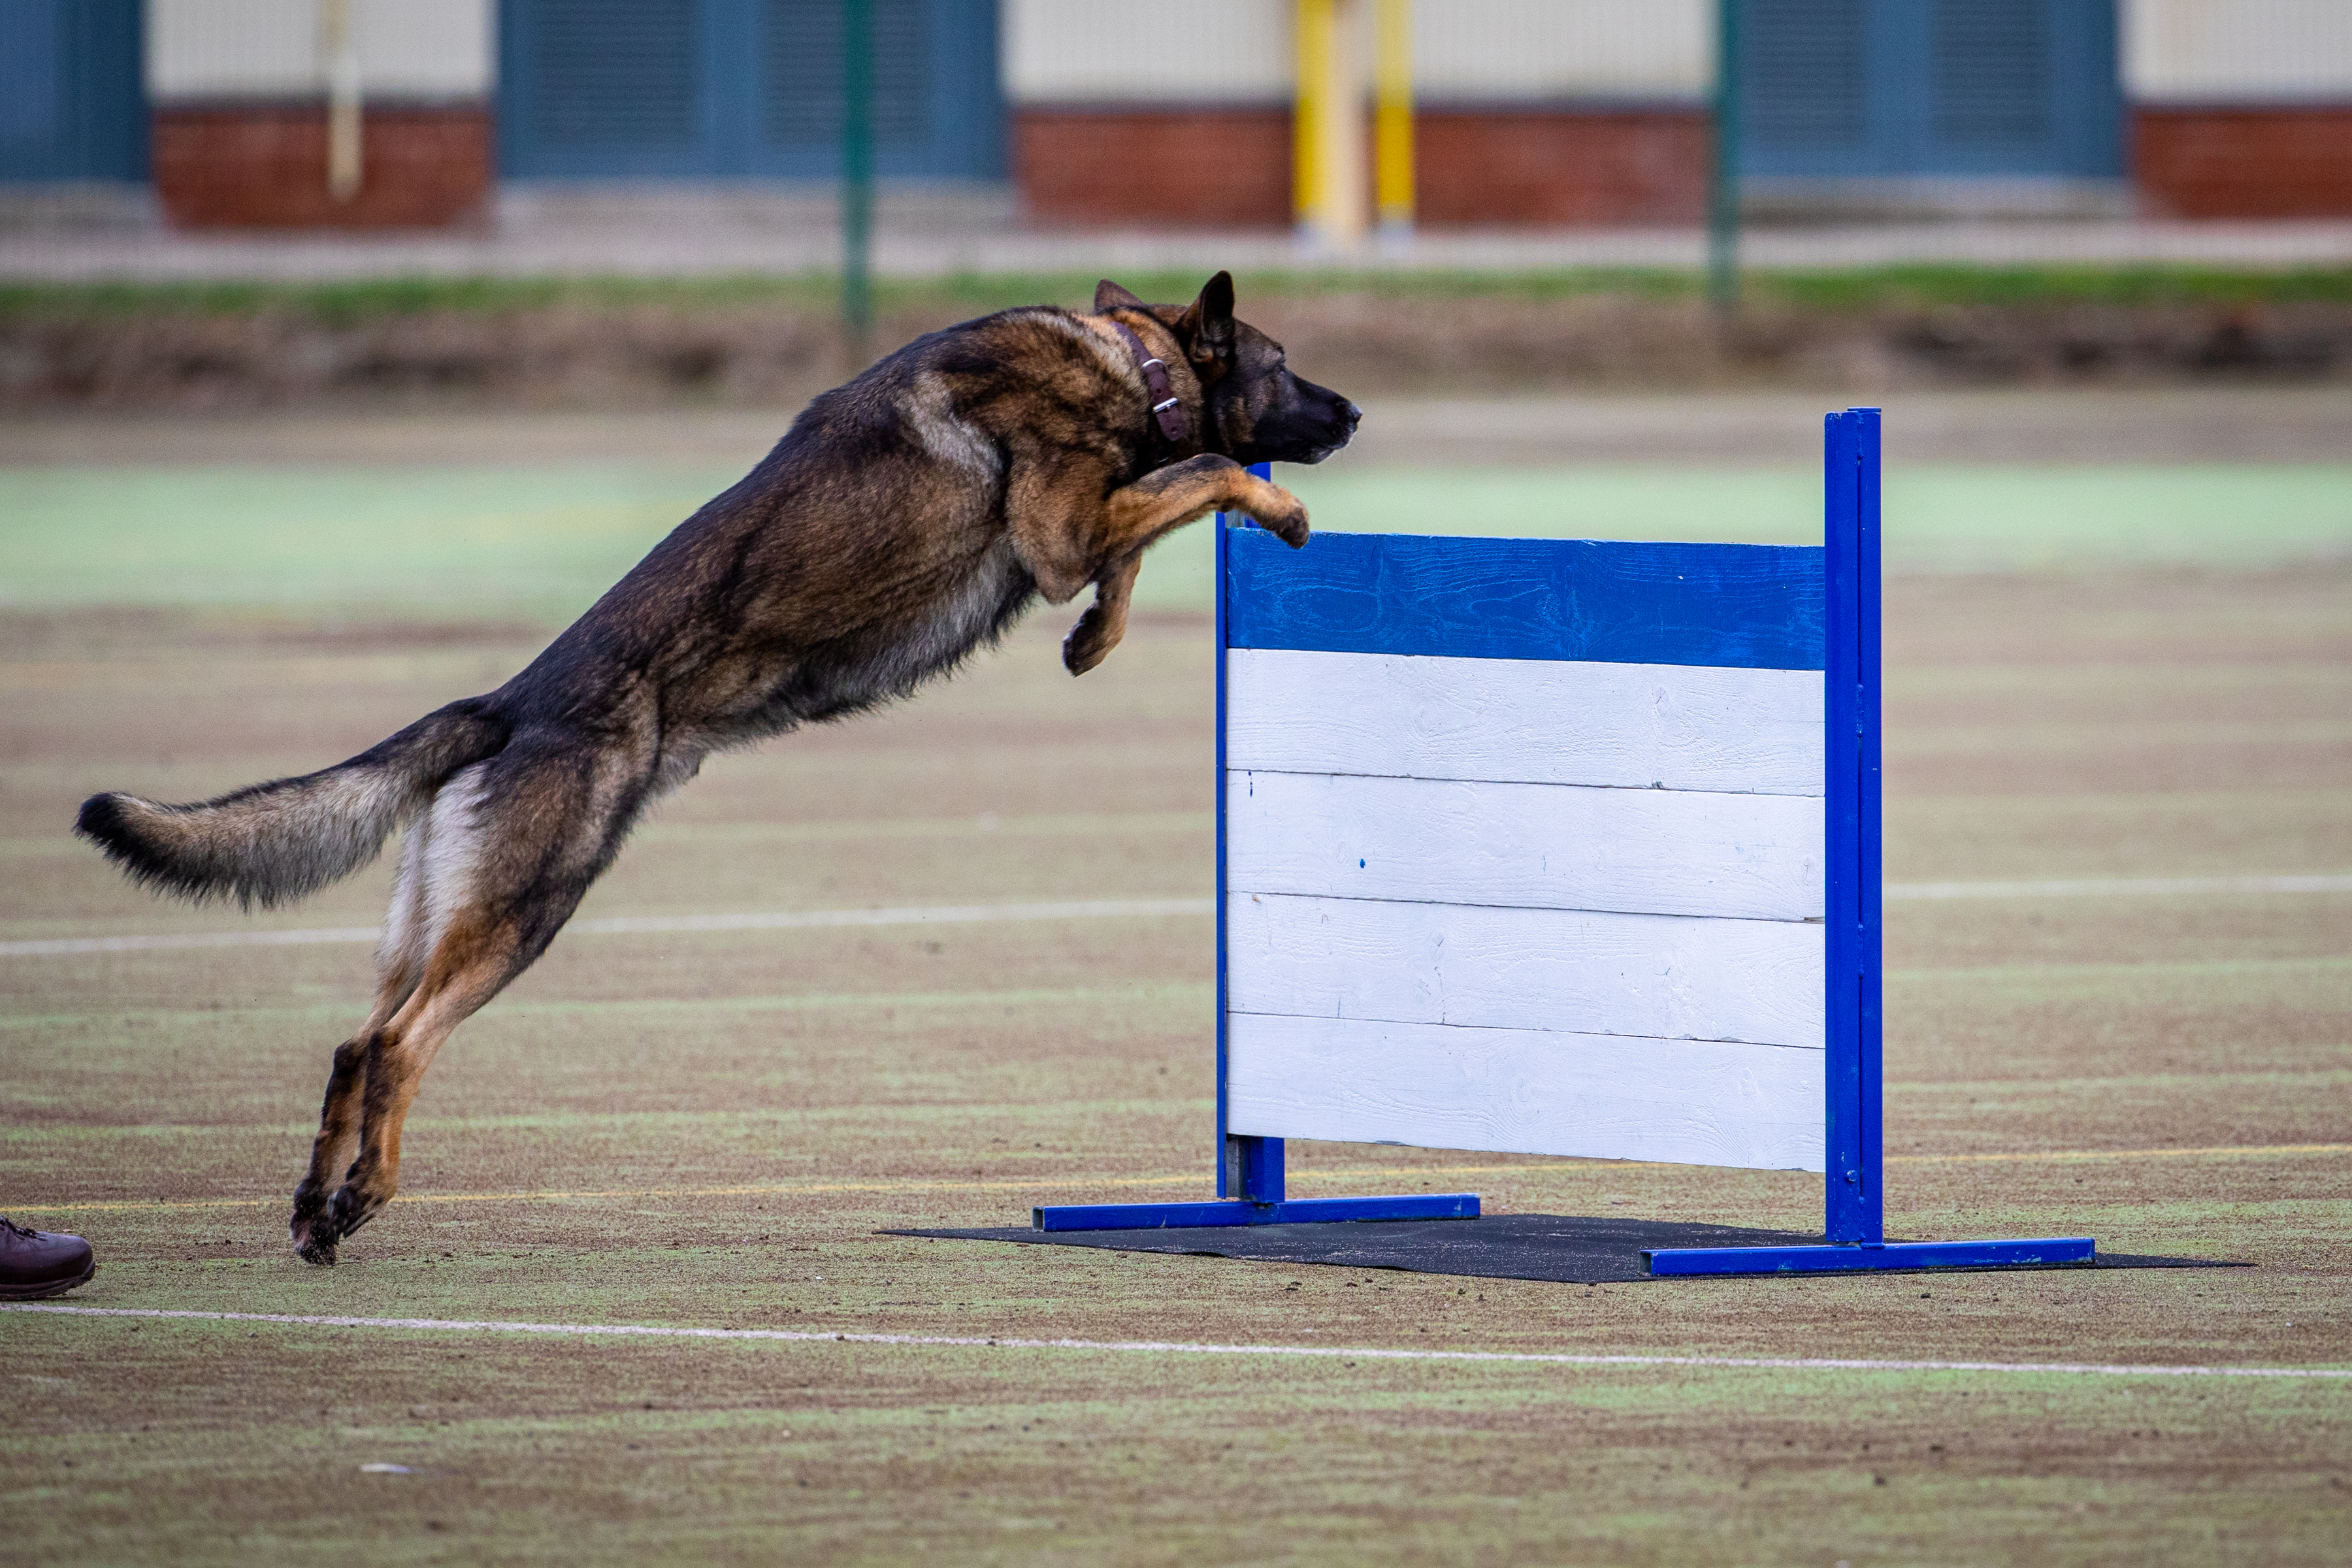 Image shows Military Working Dog jumping over hurdle.